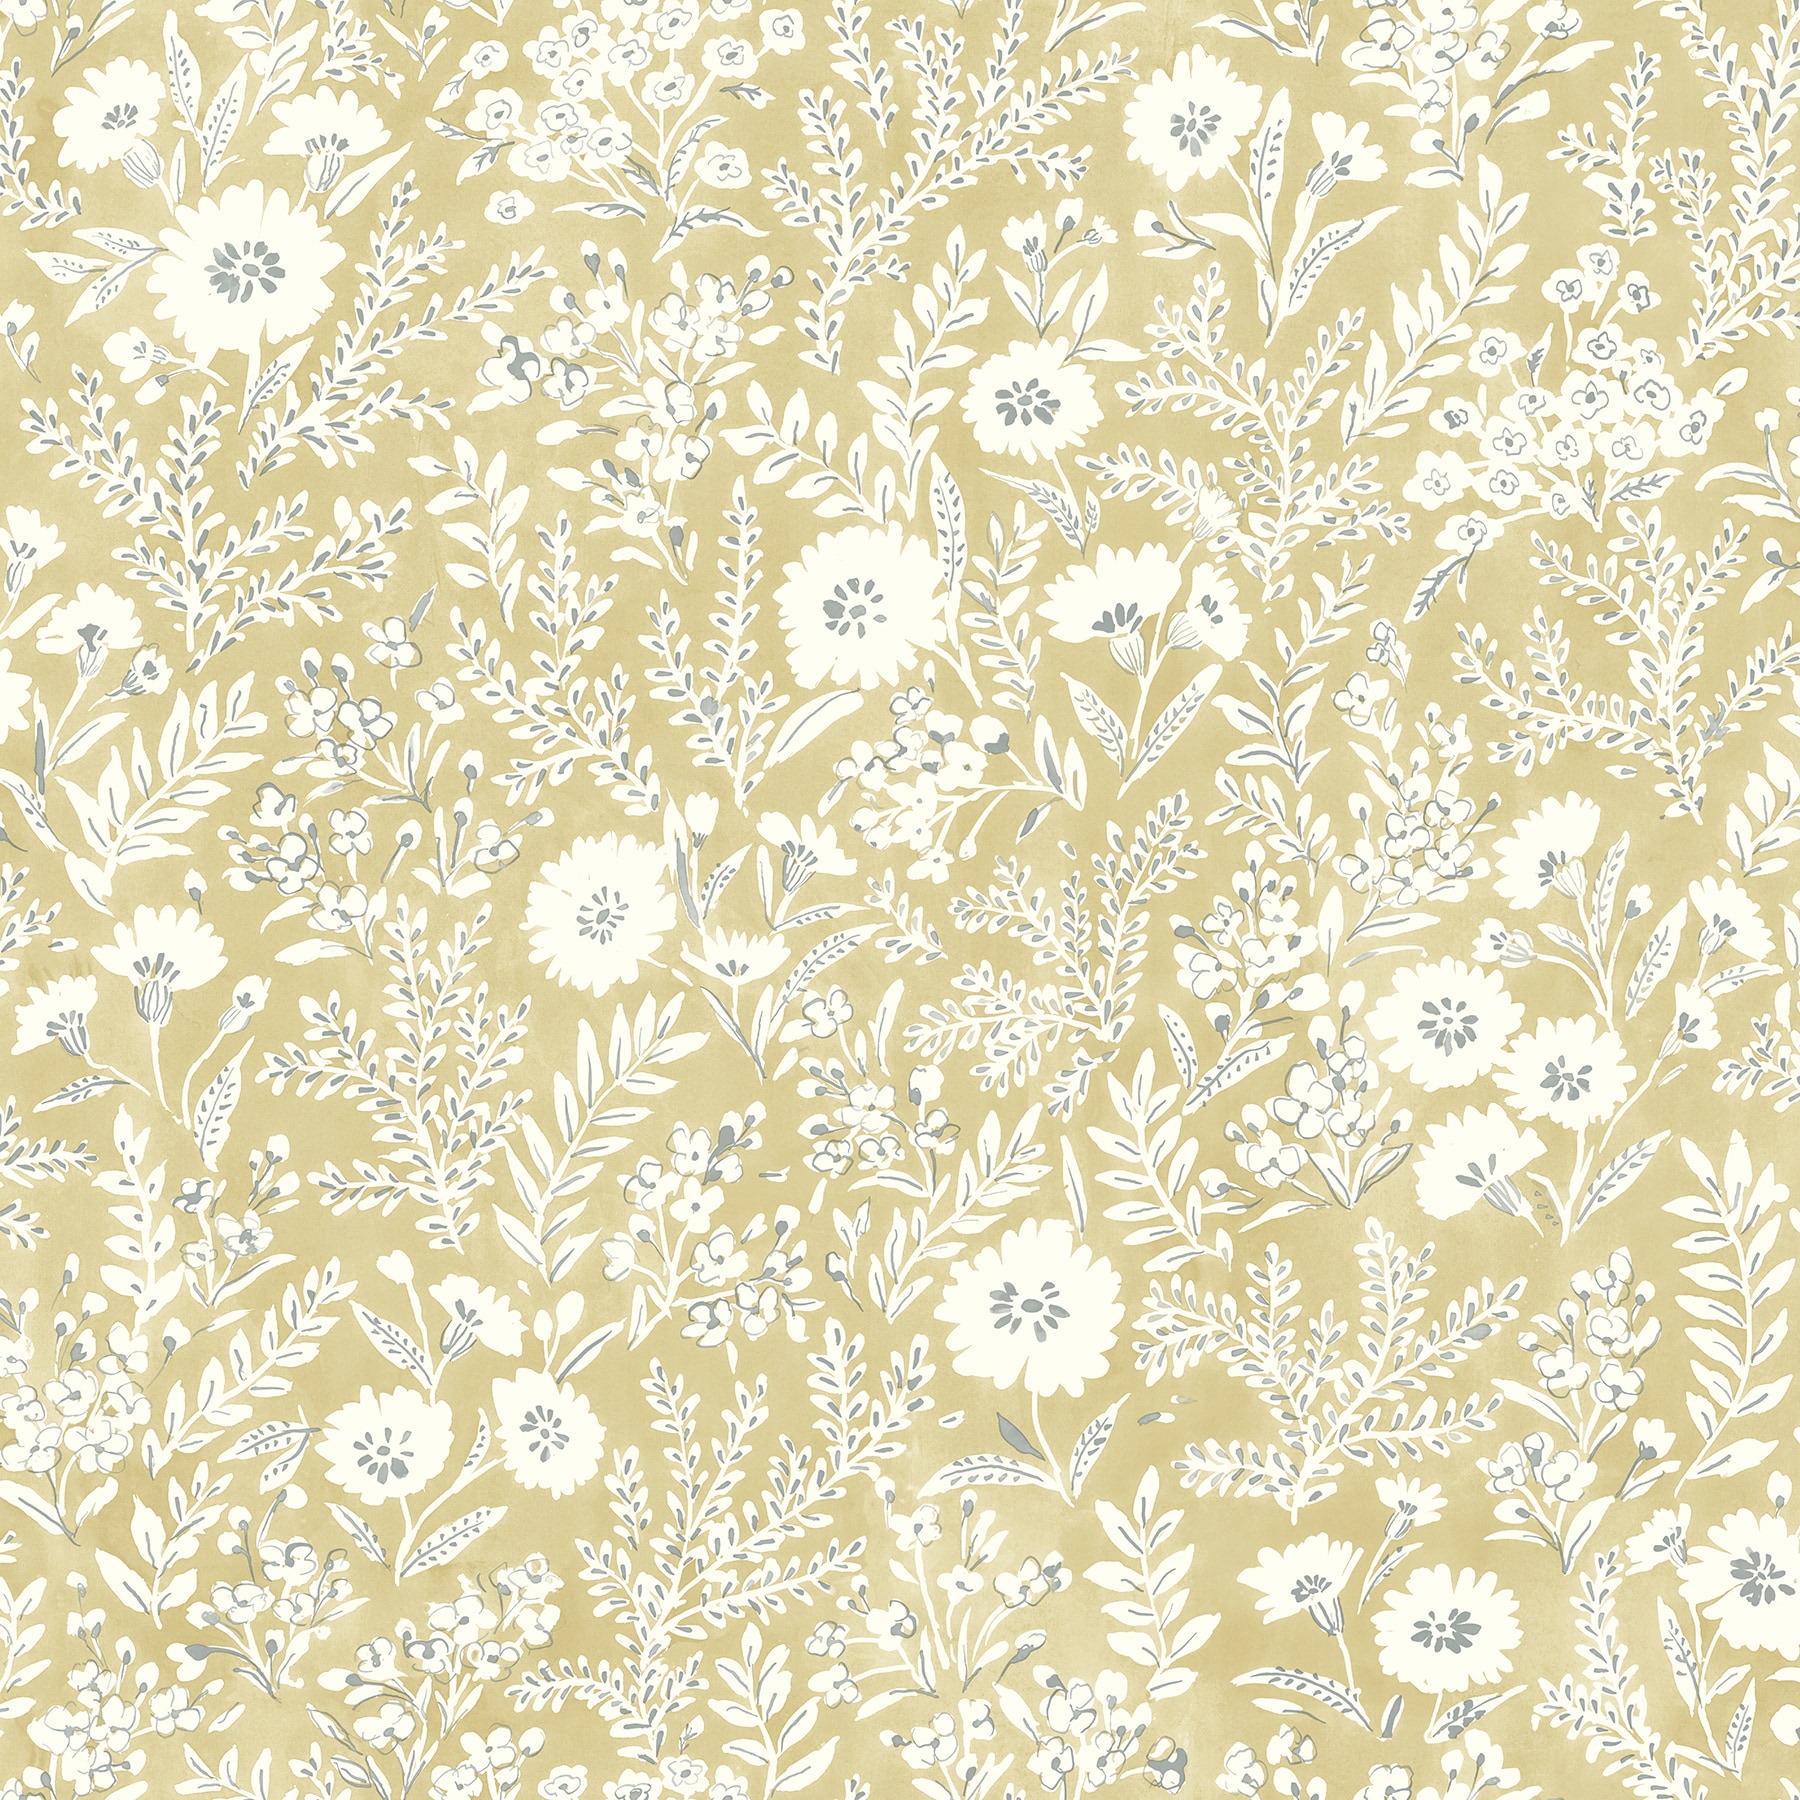 Tempaper 56sq ft Bisque Vinyl Textured Damask SelfAdhesive Peel and Stick  Wallpaper at Lowescom